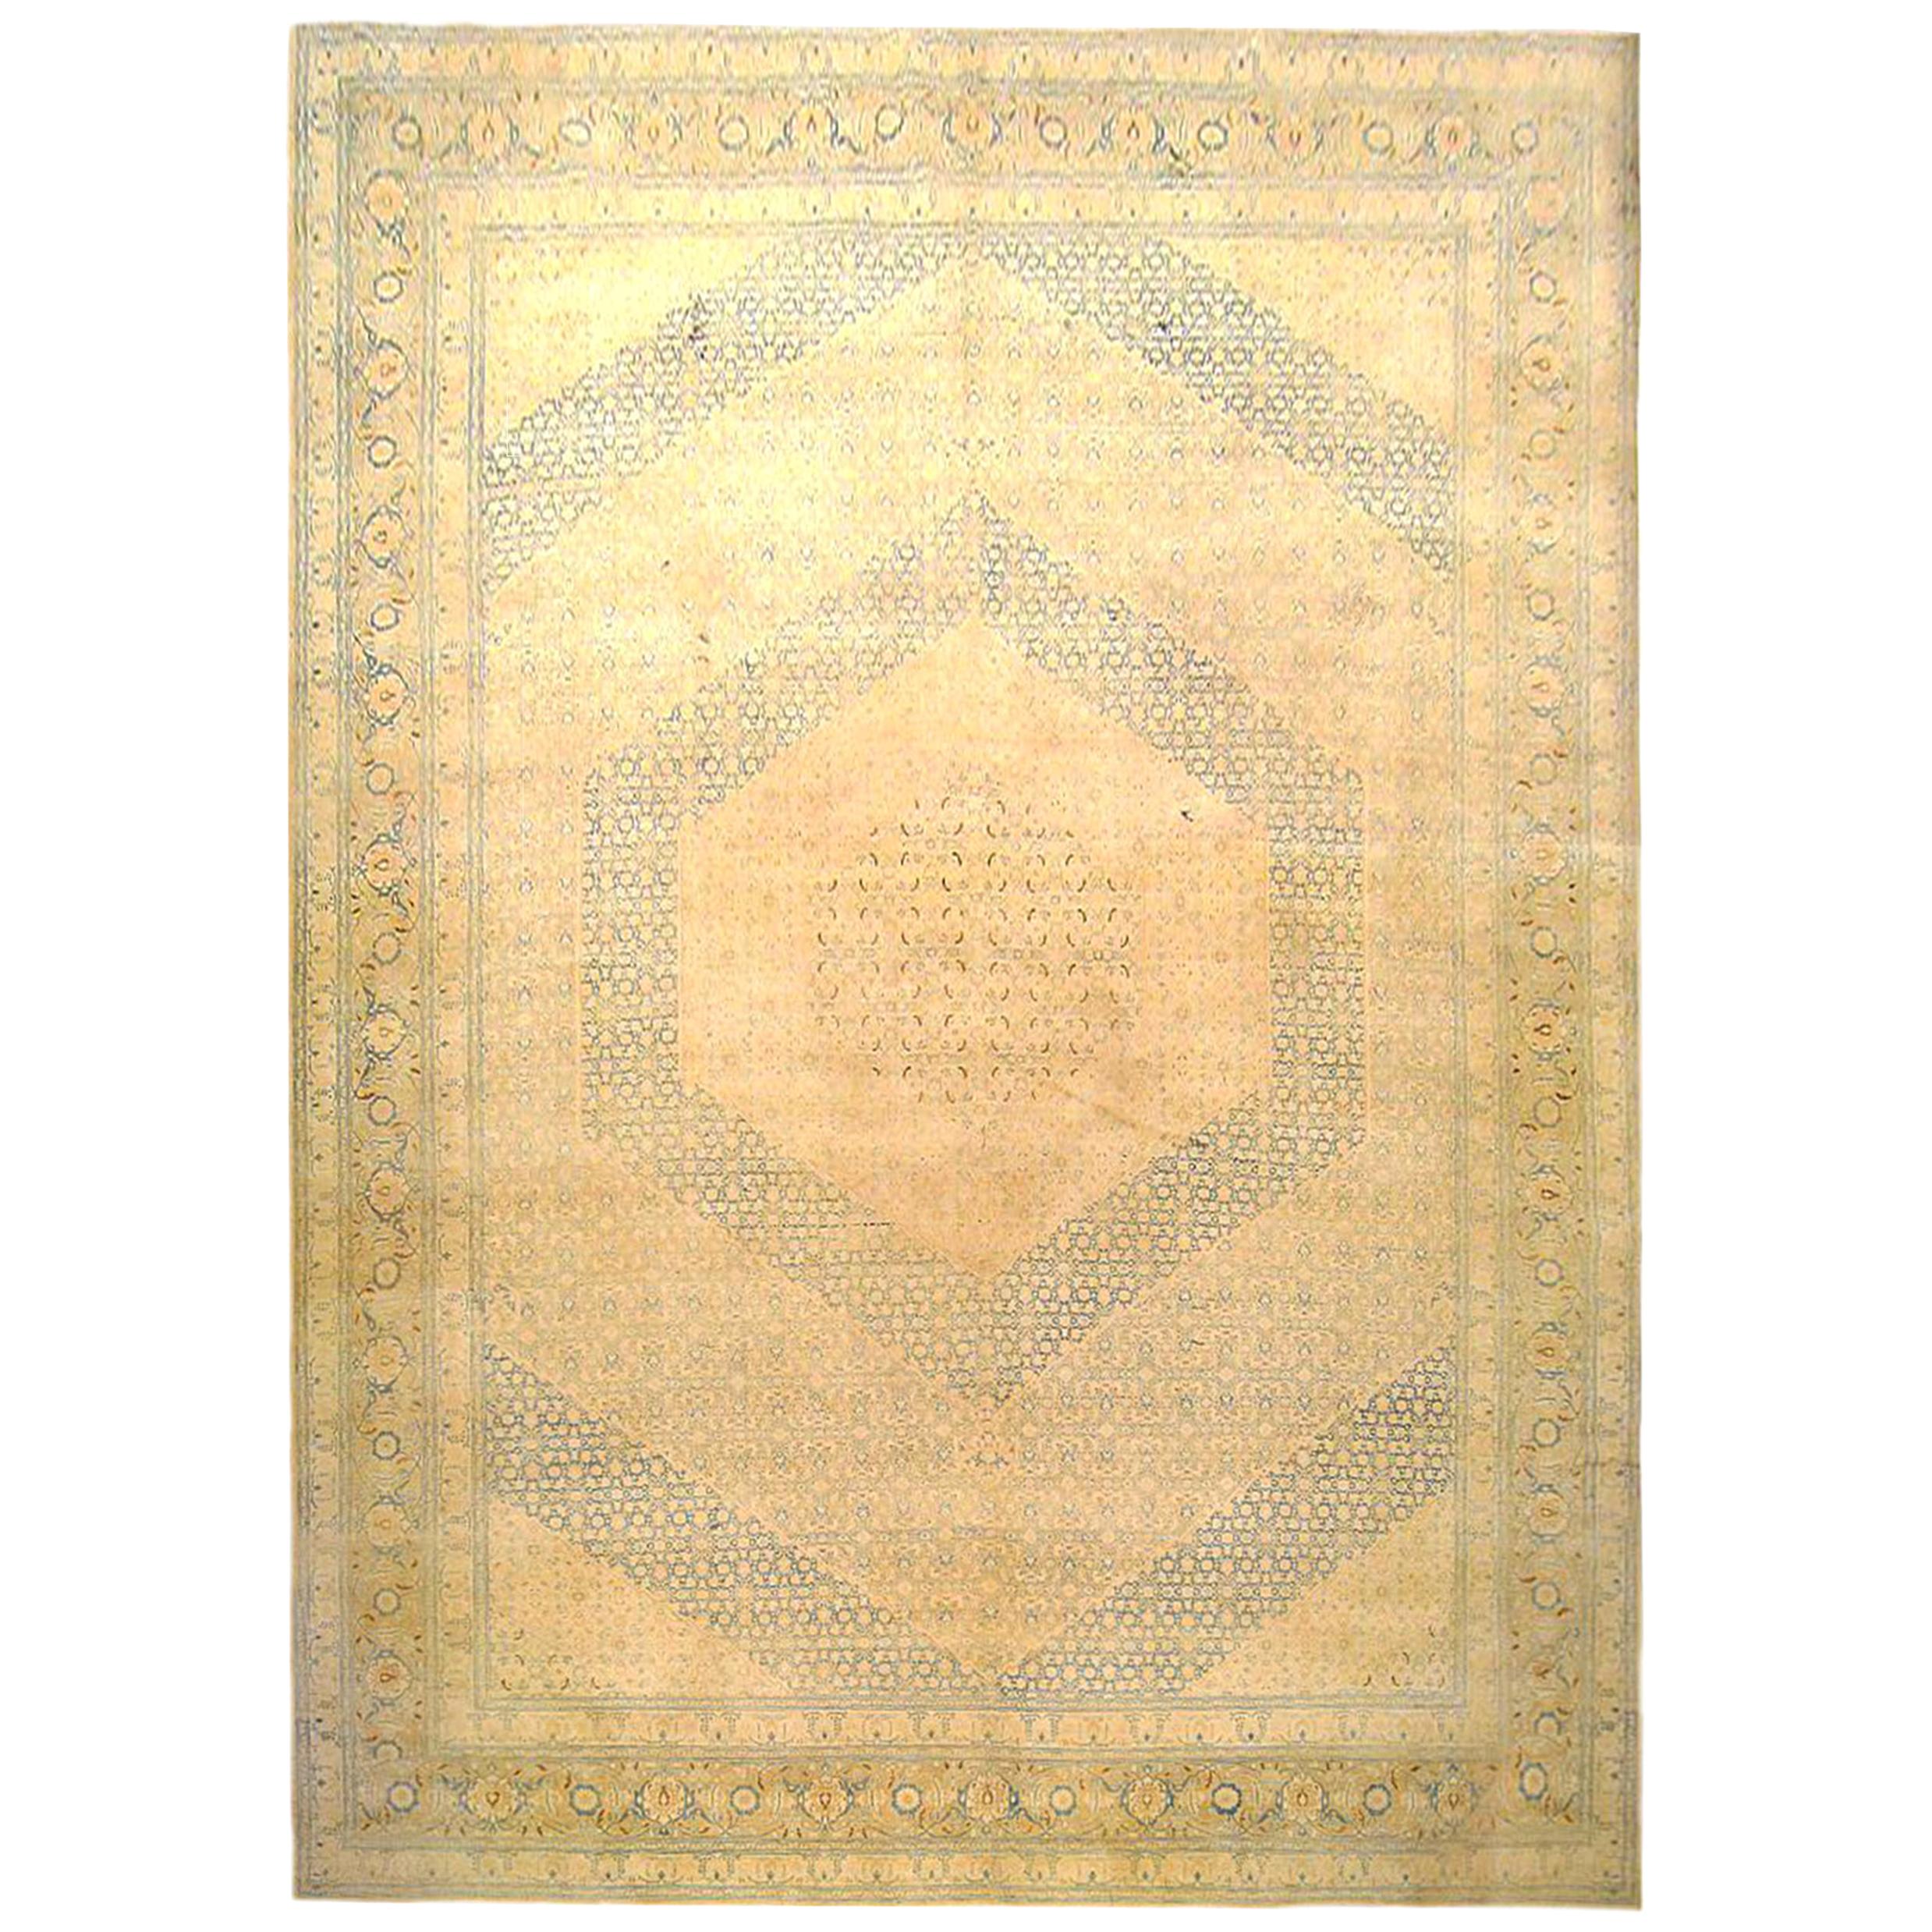 Antique Persian Tabriz Oriental Carpet in Large Squarish Size, with Soft Colors